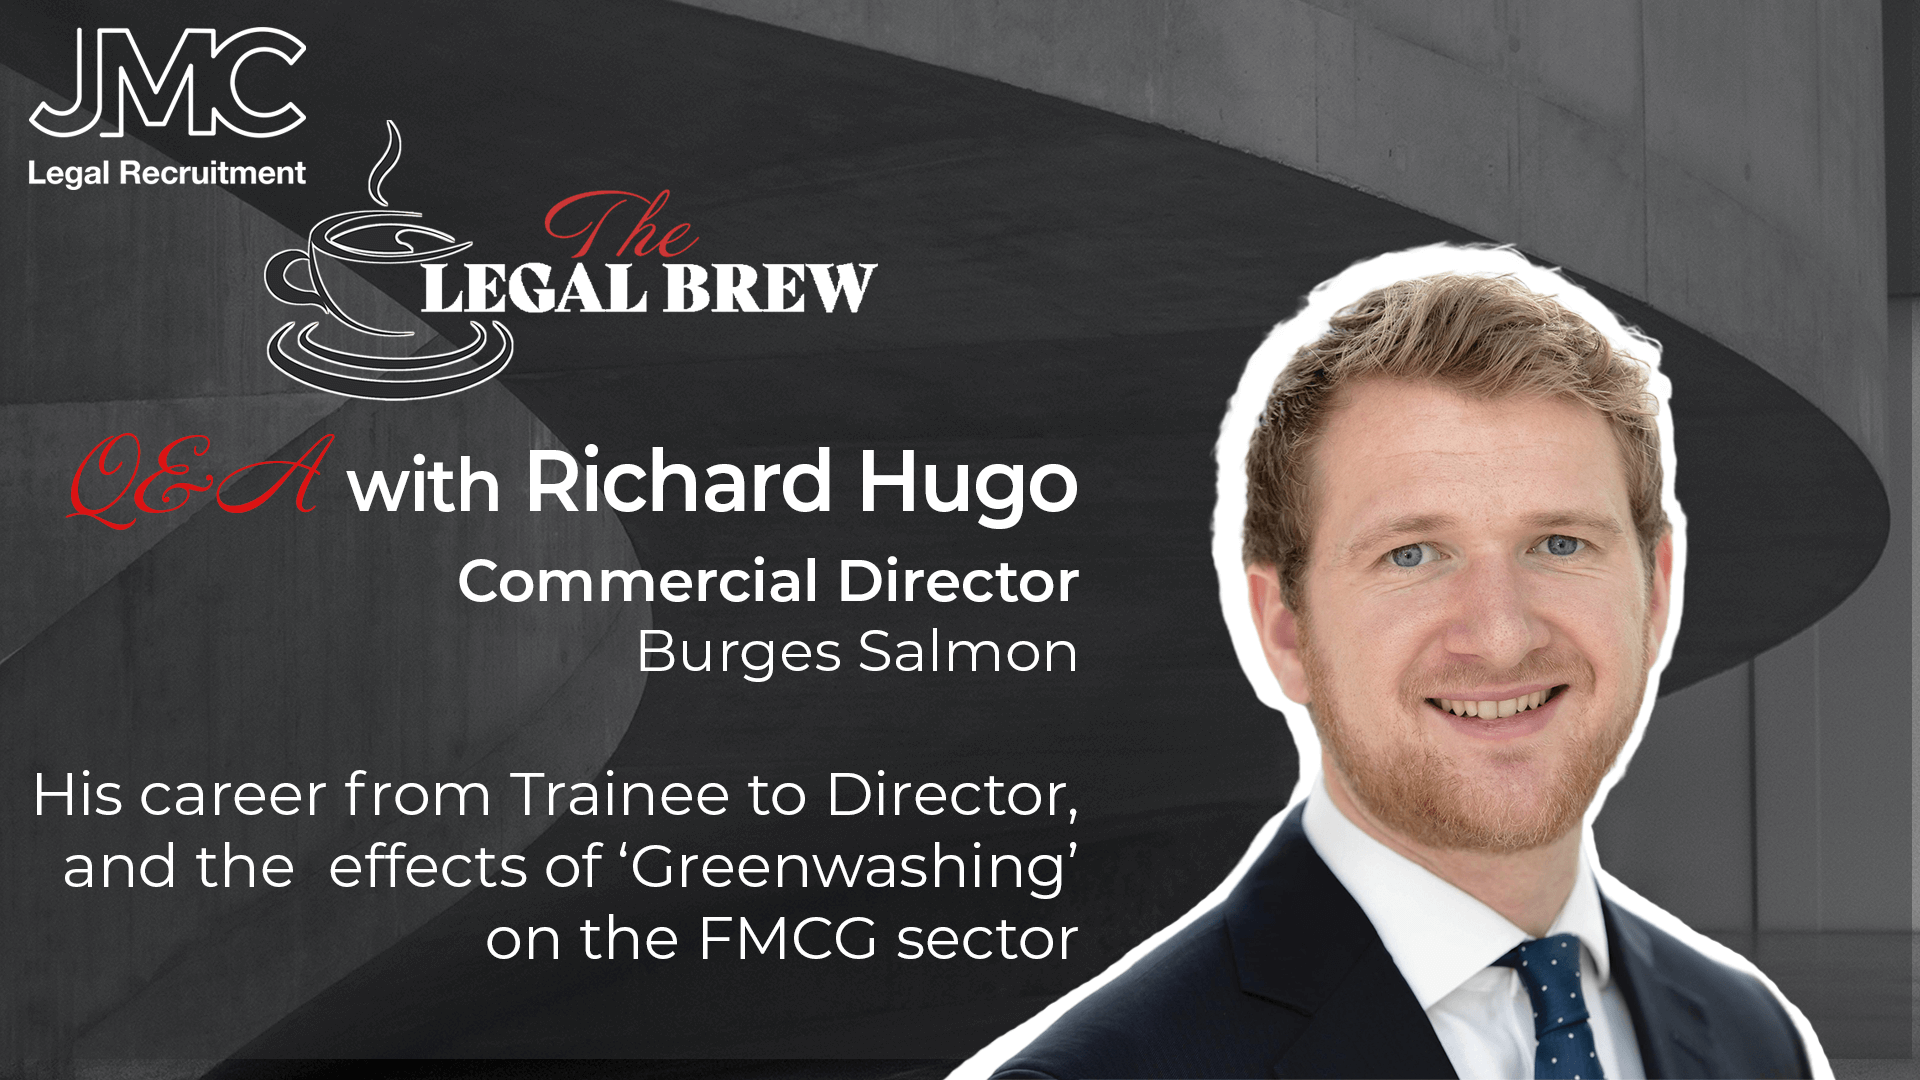 The Legal Brew with Richard Hugo